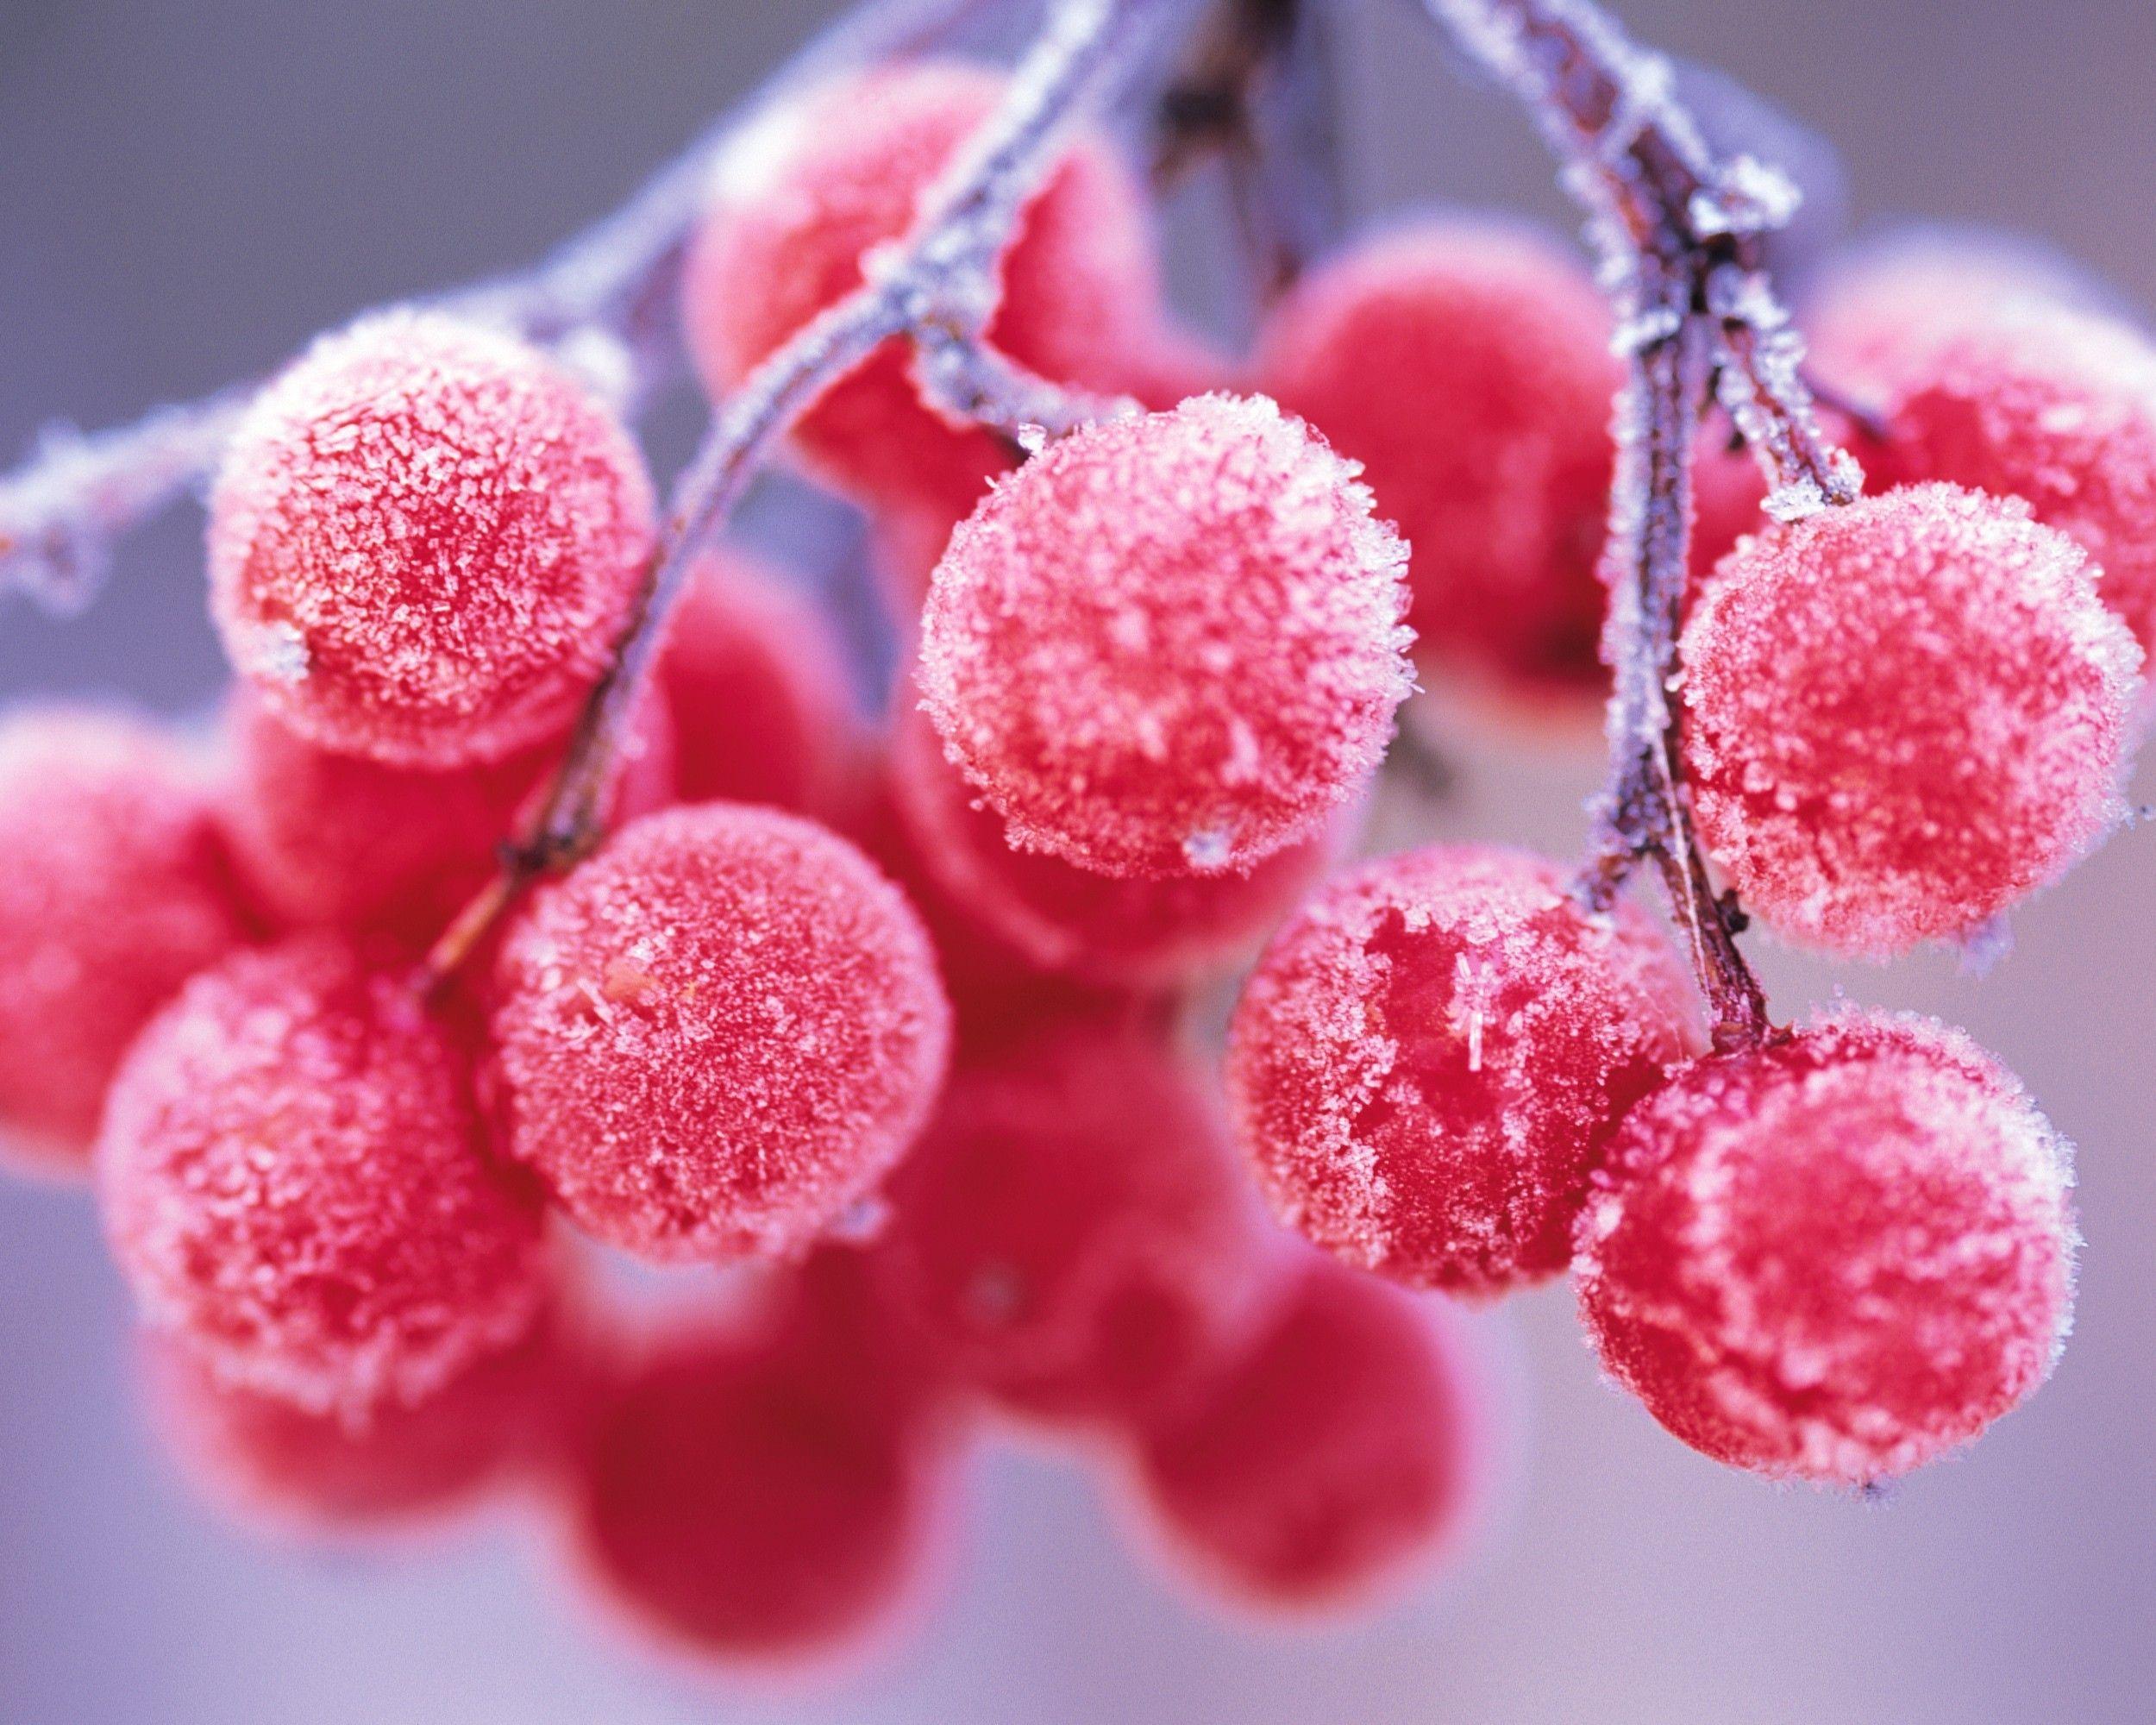 Frost fruits grapes wallpaper. PC